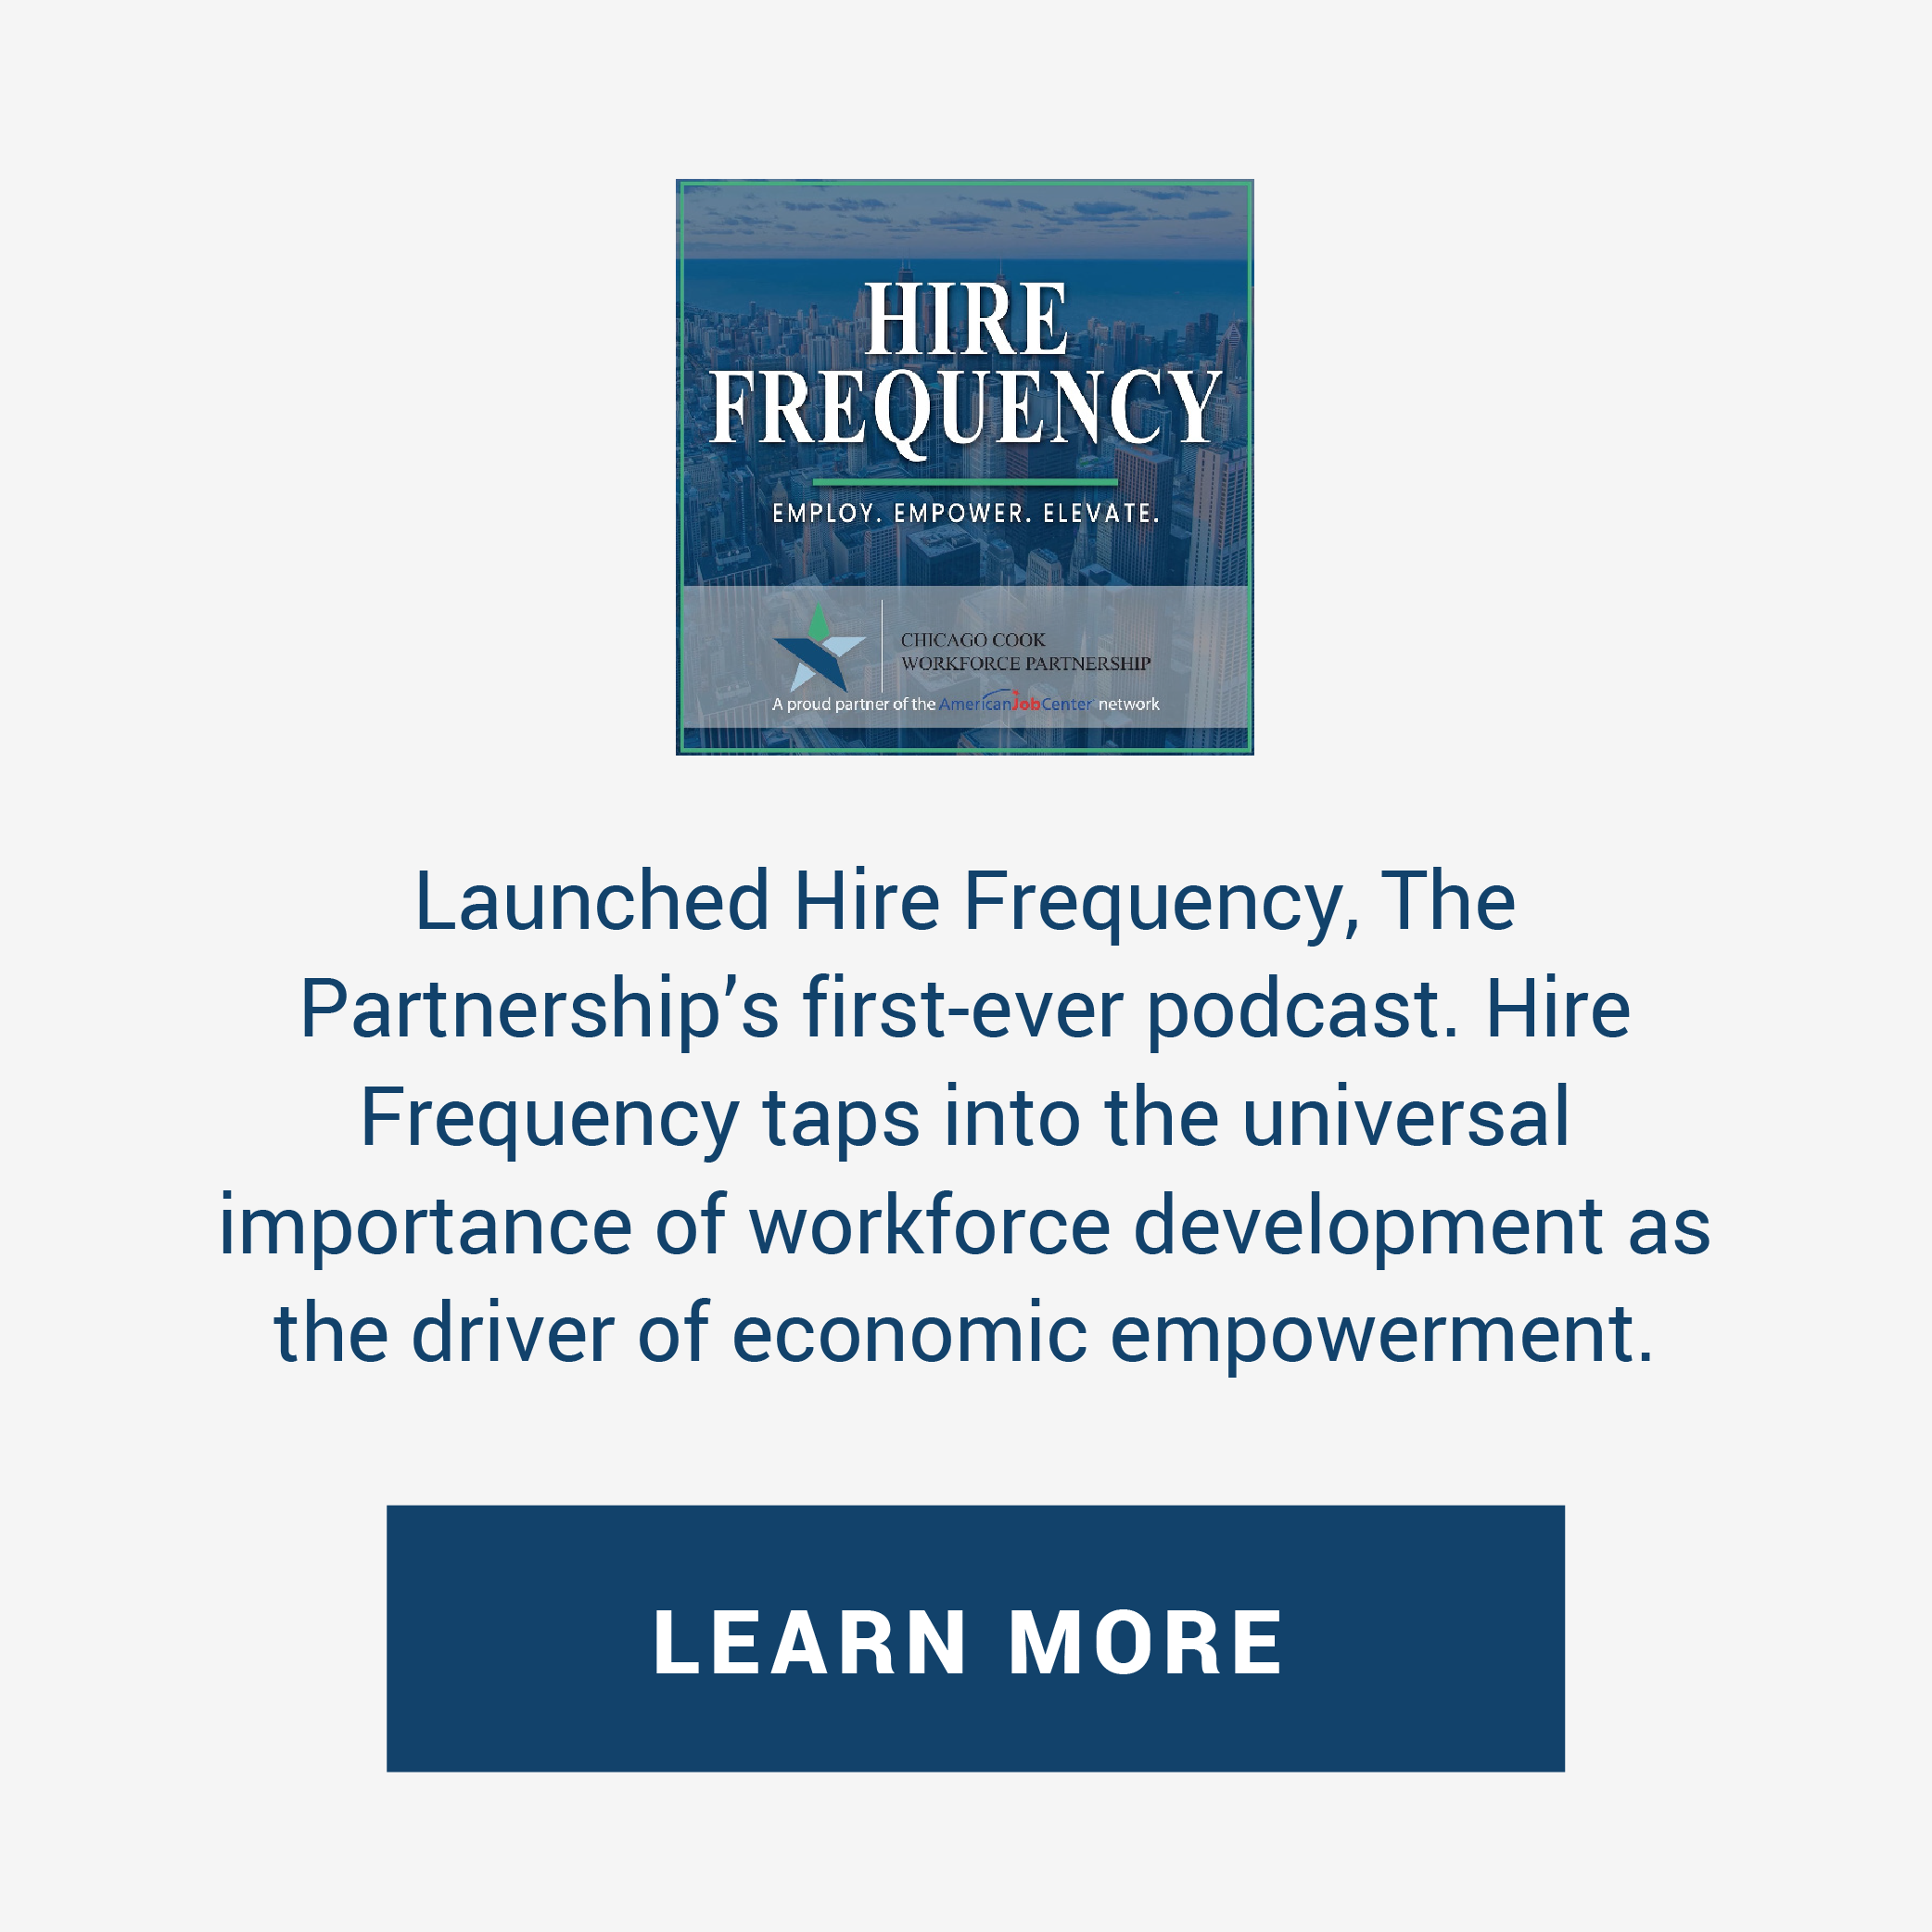 a hire frequency thumbnail